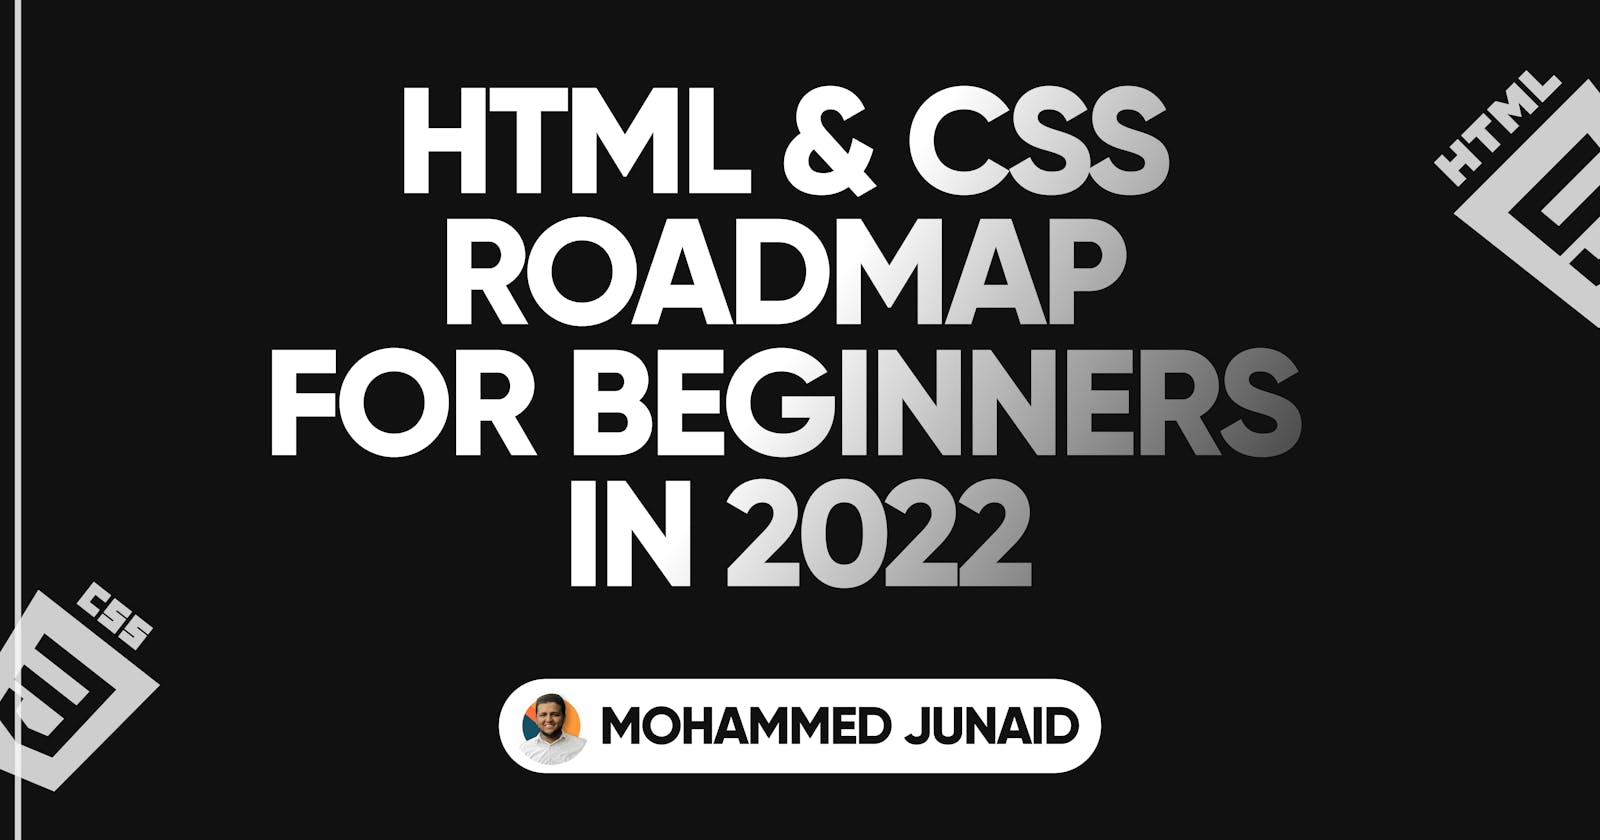 HTML & CSS Roadmap for Beginners in 2022.